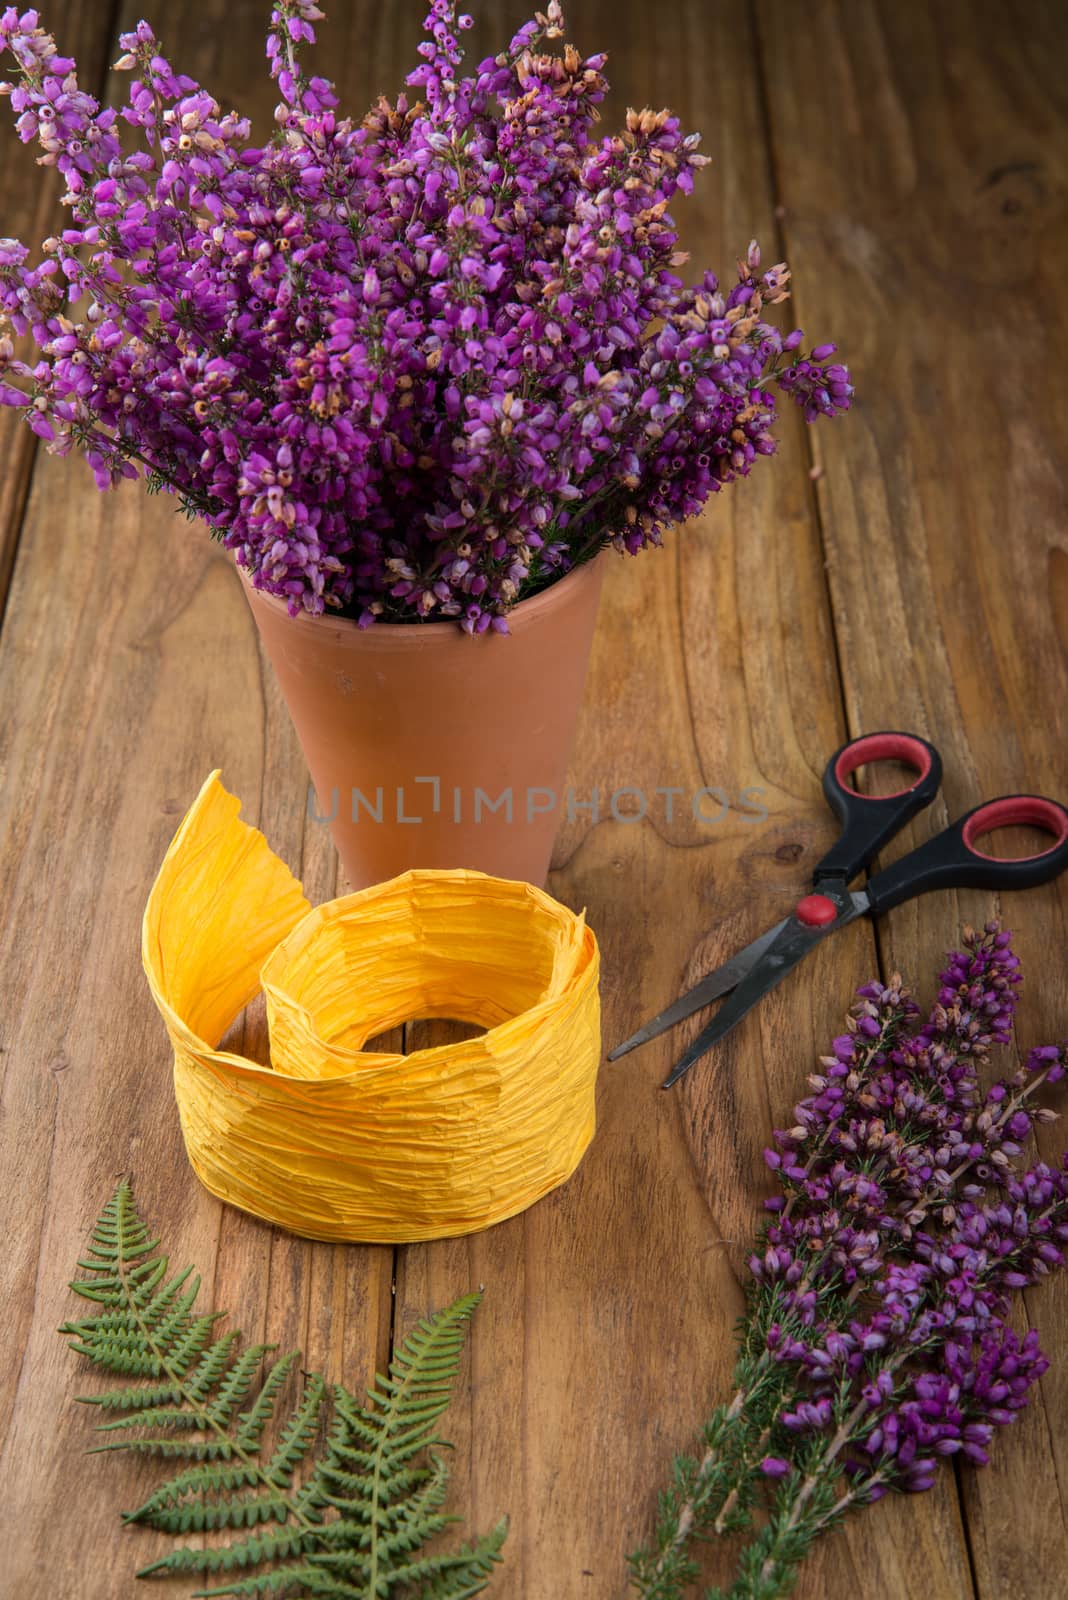 purple and viola heather flowers on wooden table in ceramic pot with yellow ribbonand scissors